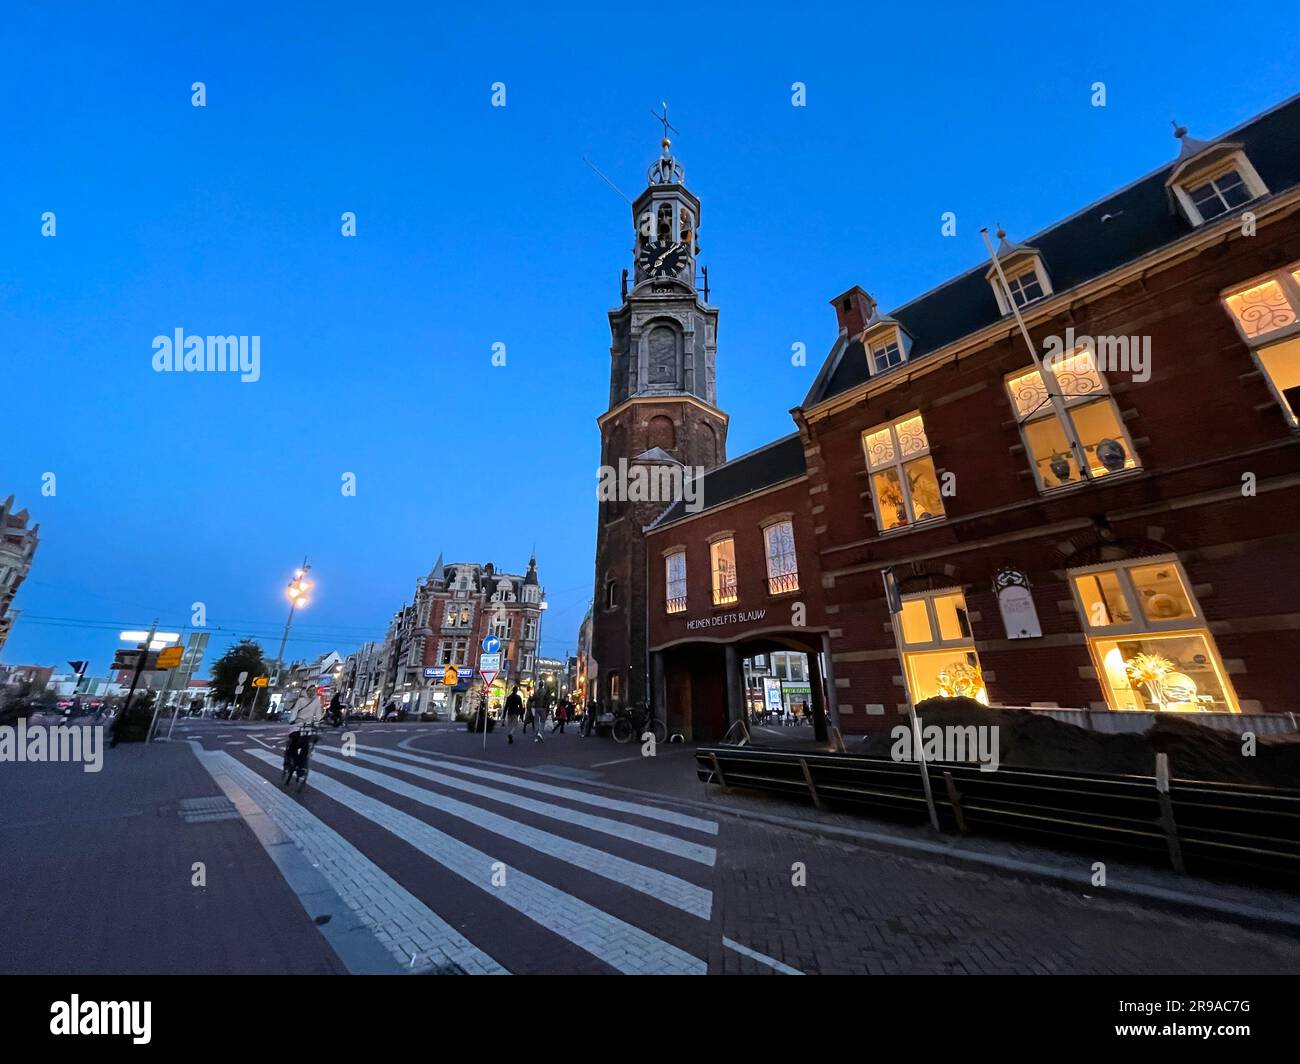 Amsterdam, NL - October 12, 2021: The Munttoren, Mint Tower is a tower in Amsterdam, the Netherlands. It stands on the busy Muntplein square, where th Stock Photo